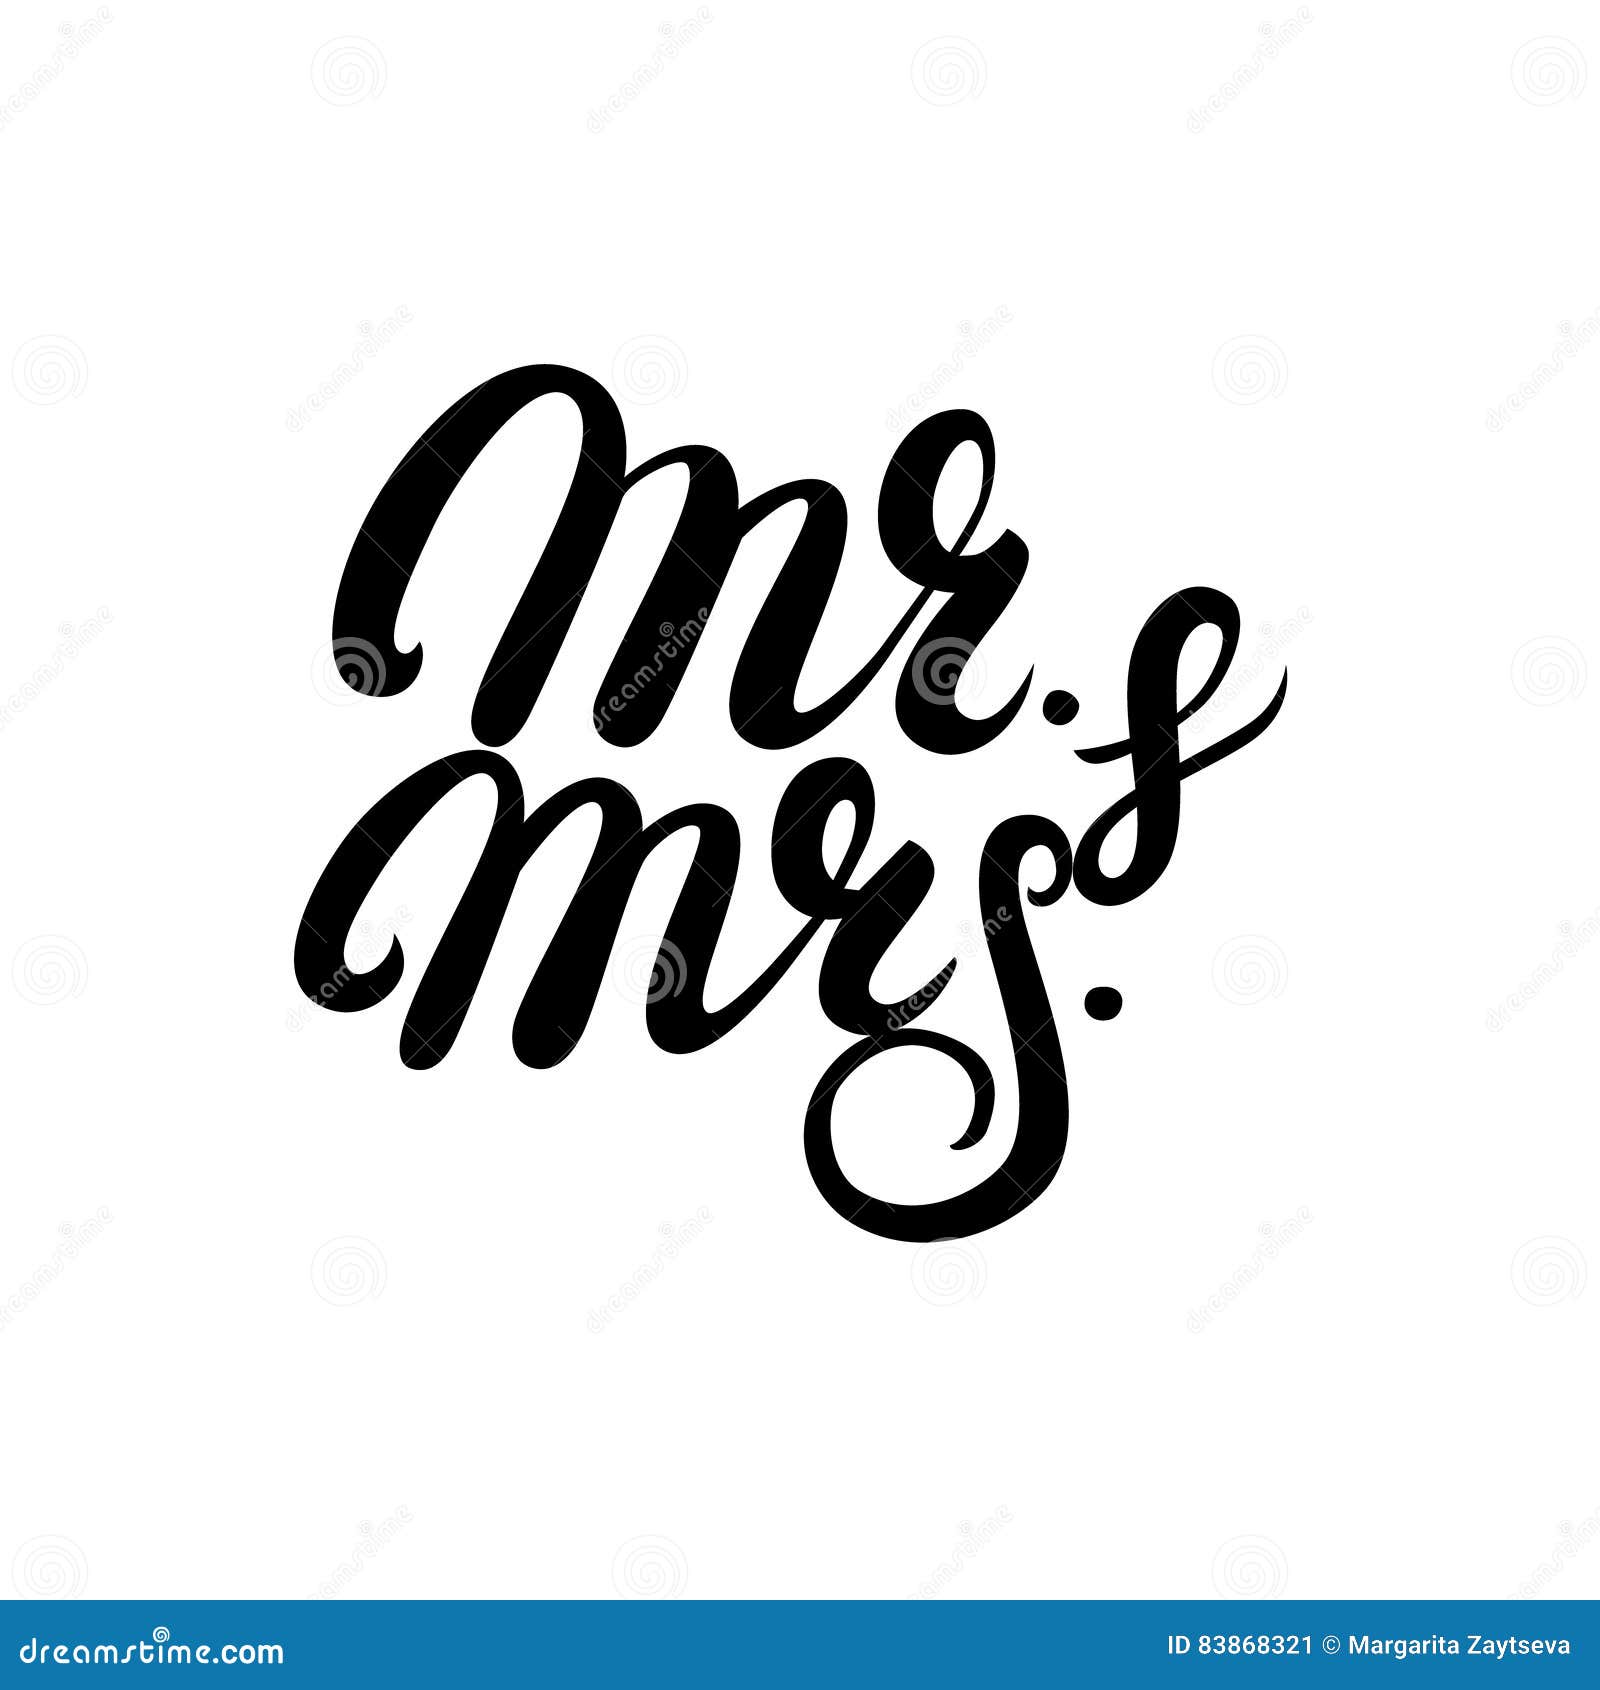 HW Initial Logo, Ampersand Initial Logo With Hand Draw Floral, Initial  Wedding Font Logo Isolated On Black And White Background. Royalty Free SVG,  Cliparts, Vectors, and Stock Illustration. Image 164817844.